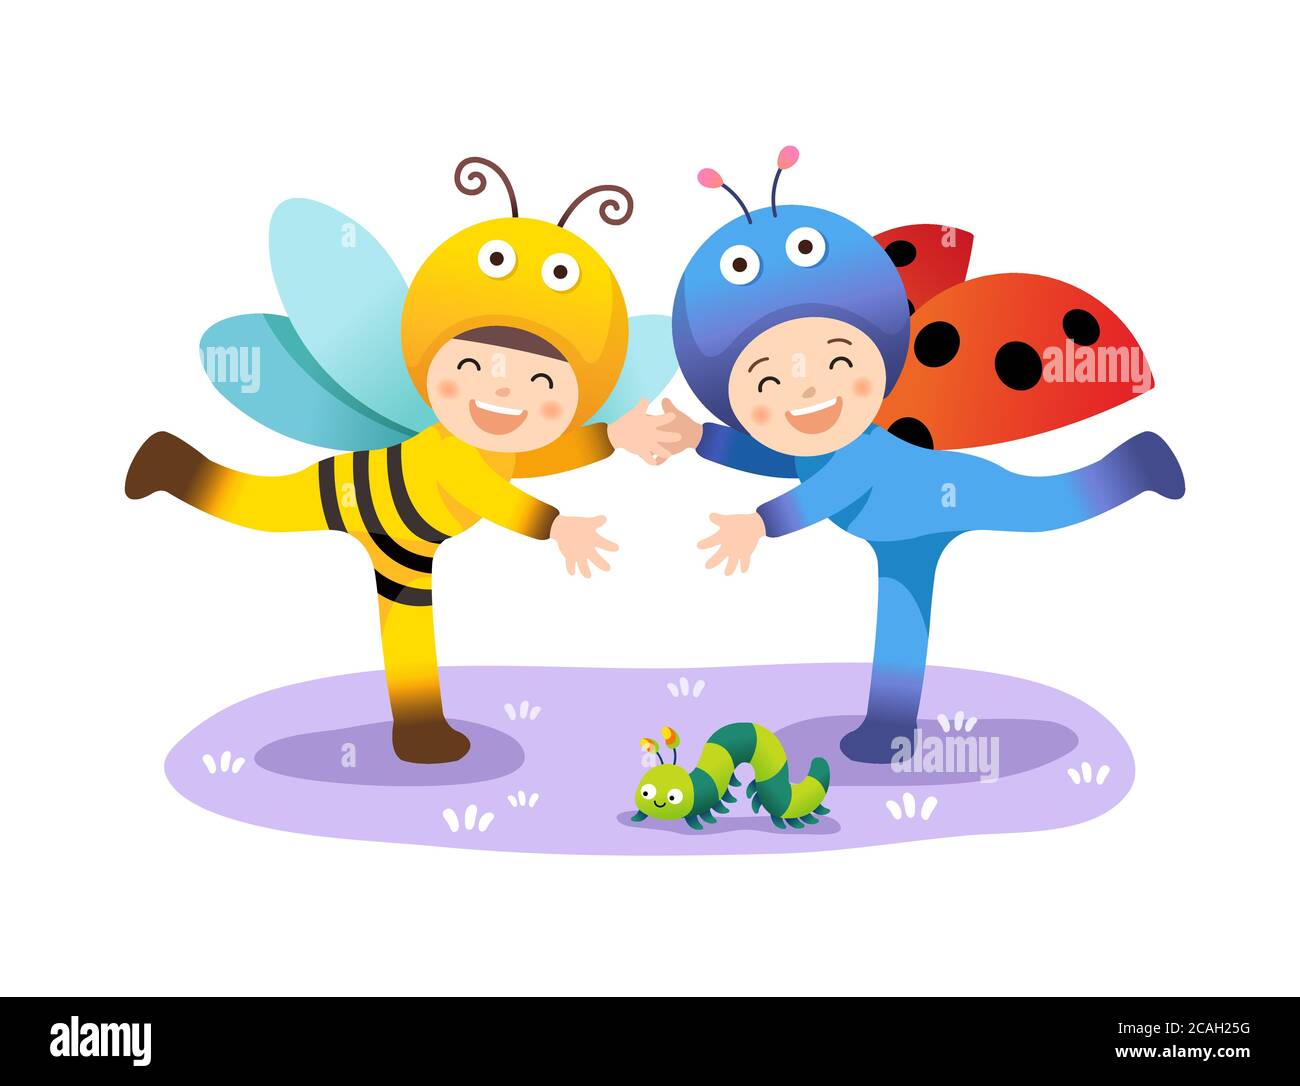 Children education, children play in cute insect costumes. White background, vector illustration. Stock Vector